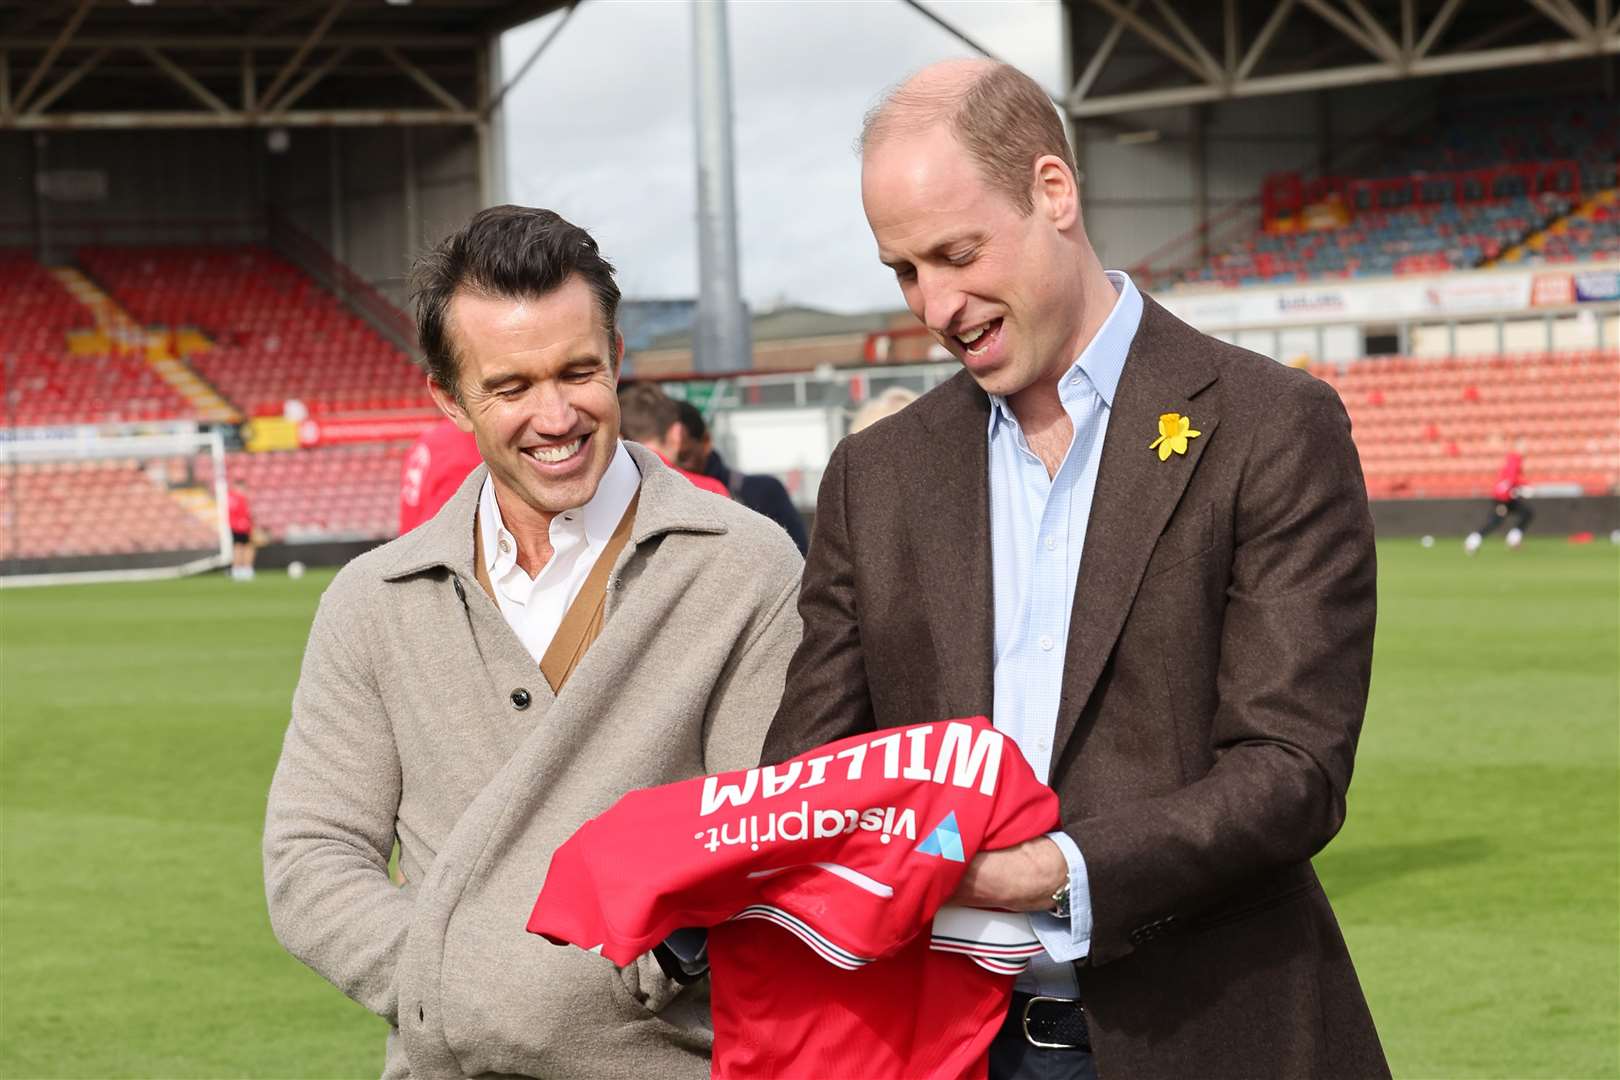 The Prince of Wales with Wrexham AFC co-chairman and co-owner Rob McElhenney (Chris Jackson/PA)